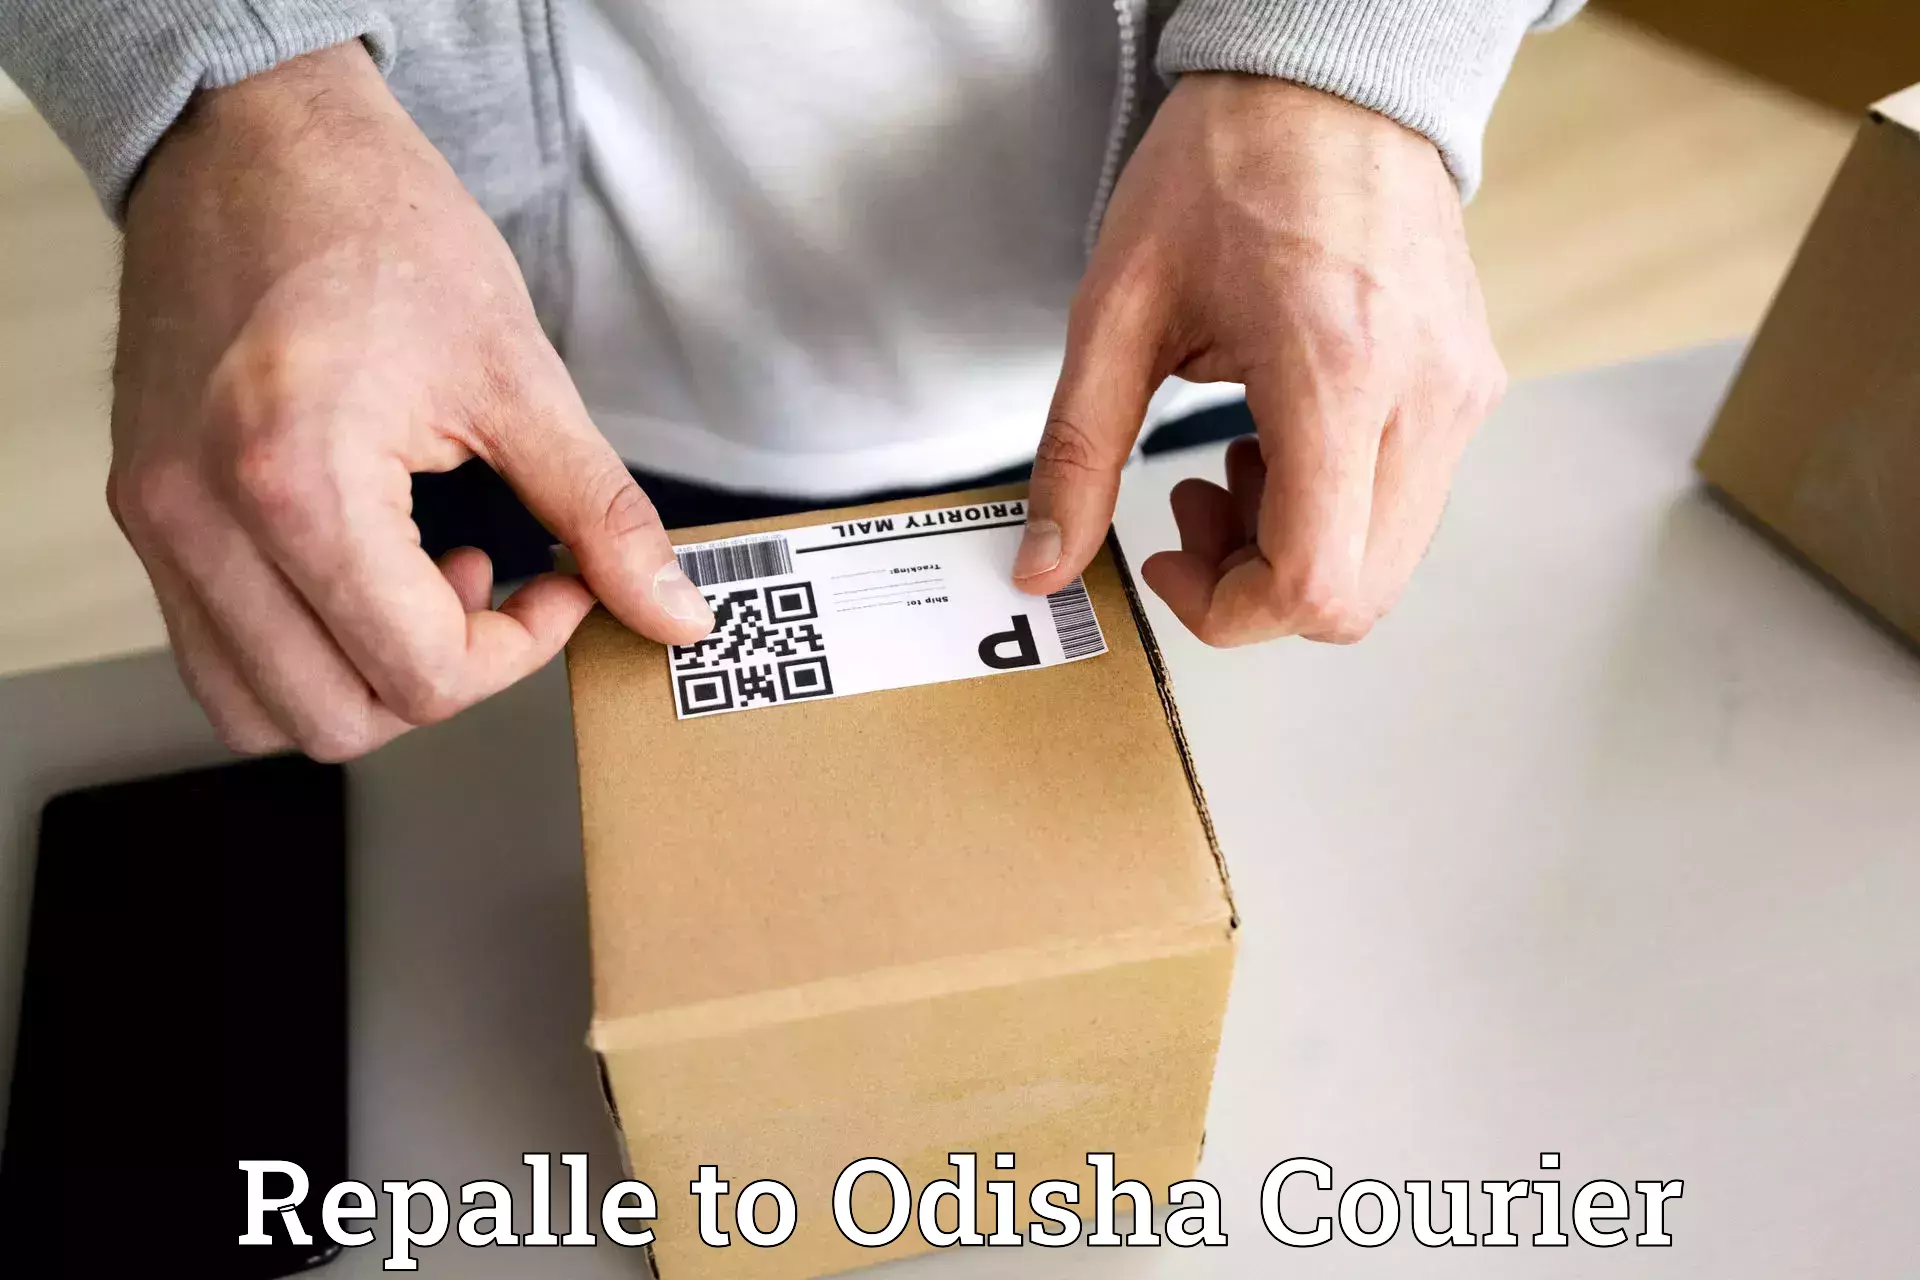 Large package courier Repalle to Kupari